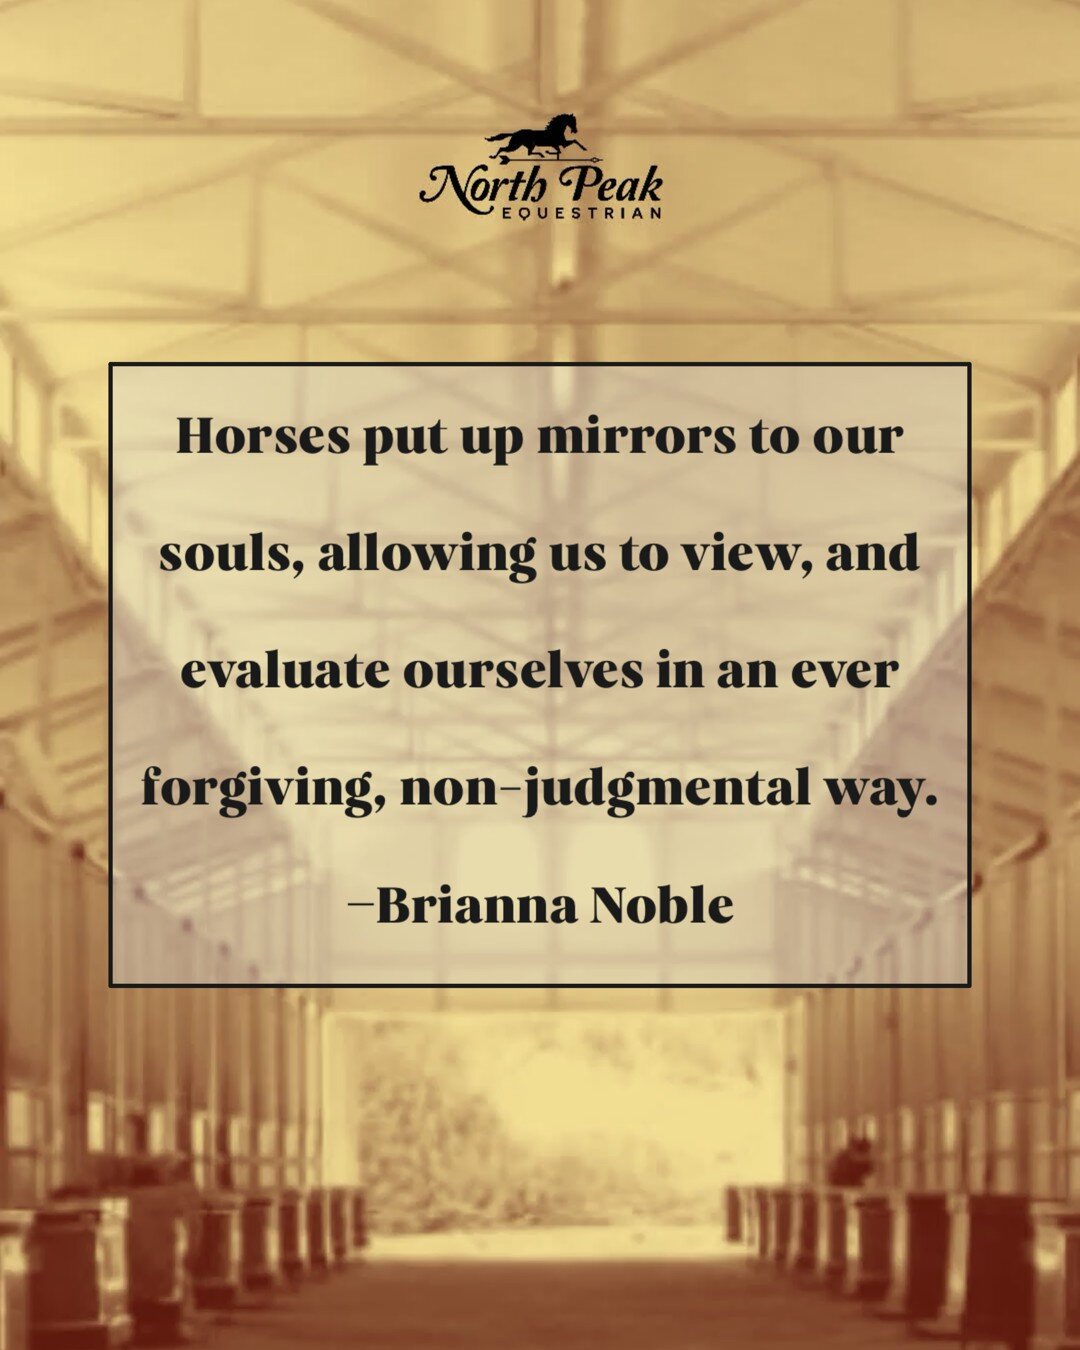 Horses put up mirrors to our souls, allowing us to view, and evaluate ourselves in an ever forgiving, non-judgmental way. -Brianna Noble
.
.
.
#northpeakequestrian 
#MartinLutherKingJrDay 
#horses 
#equestrianlife